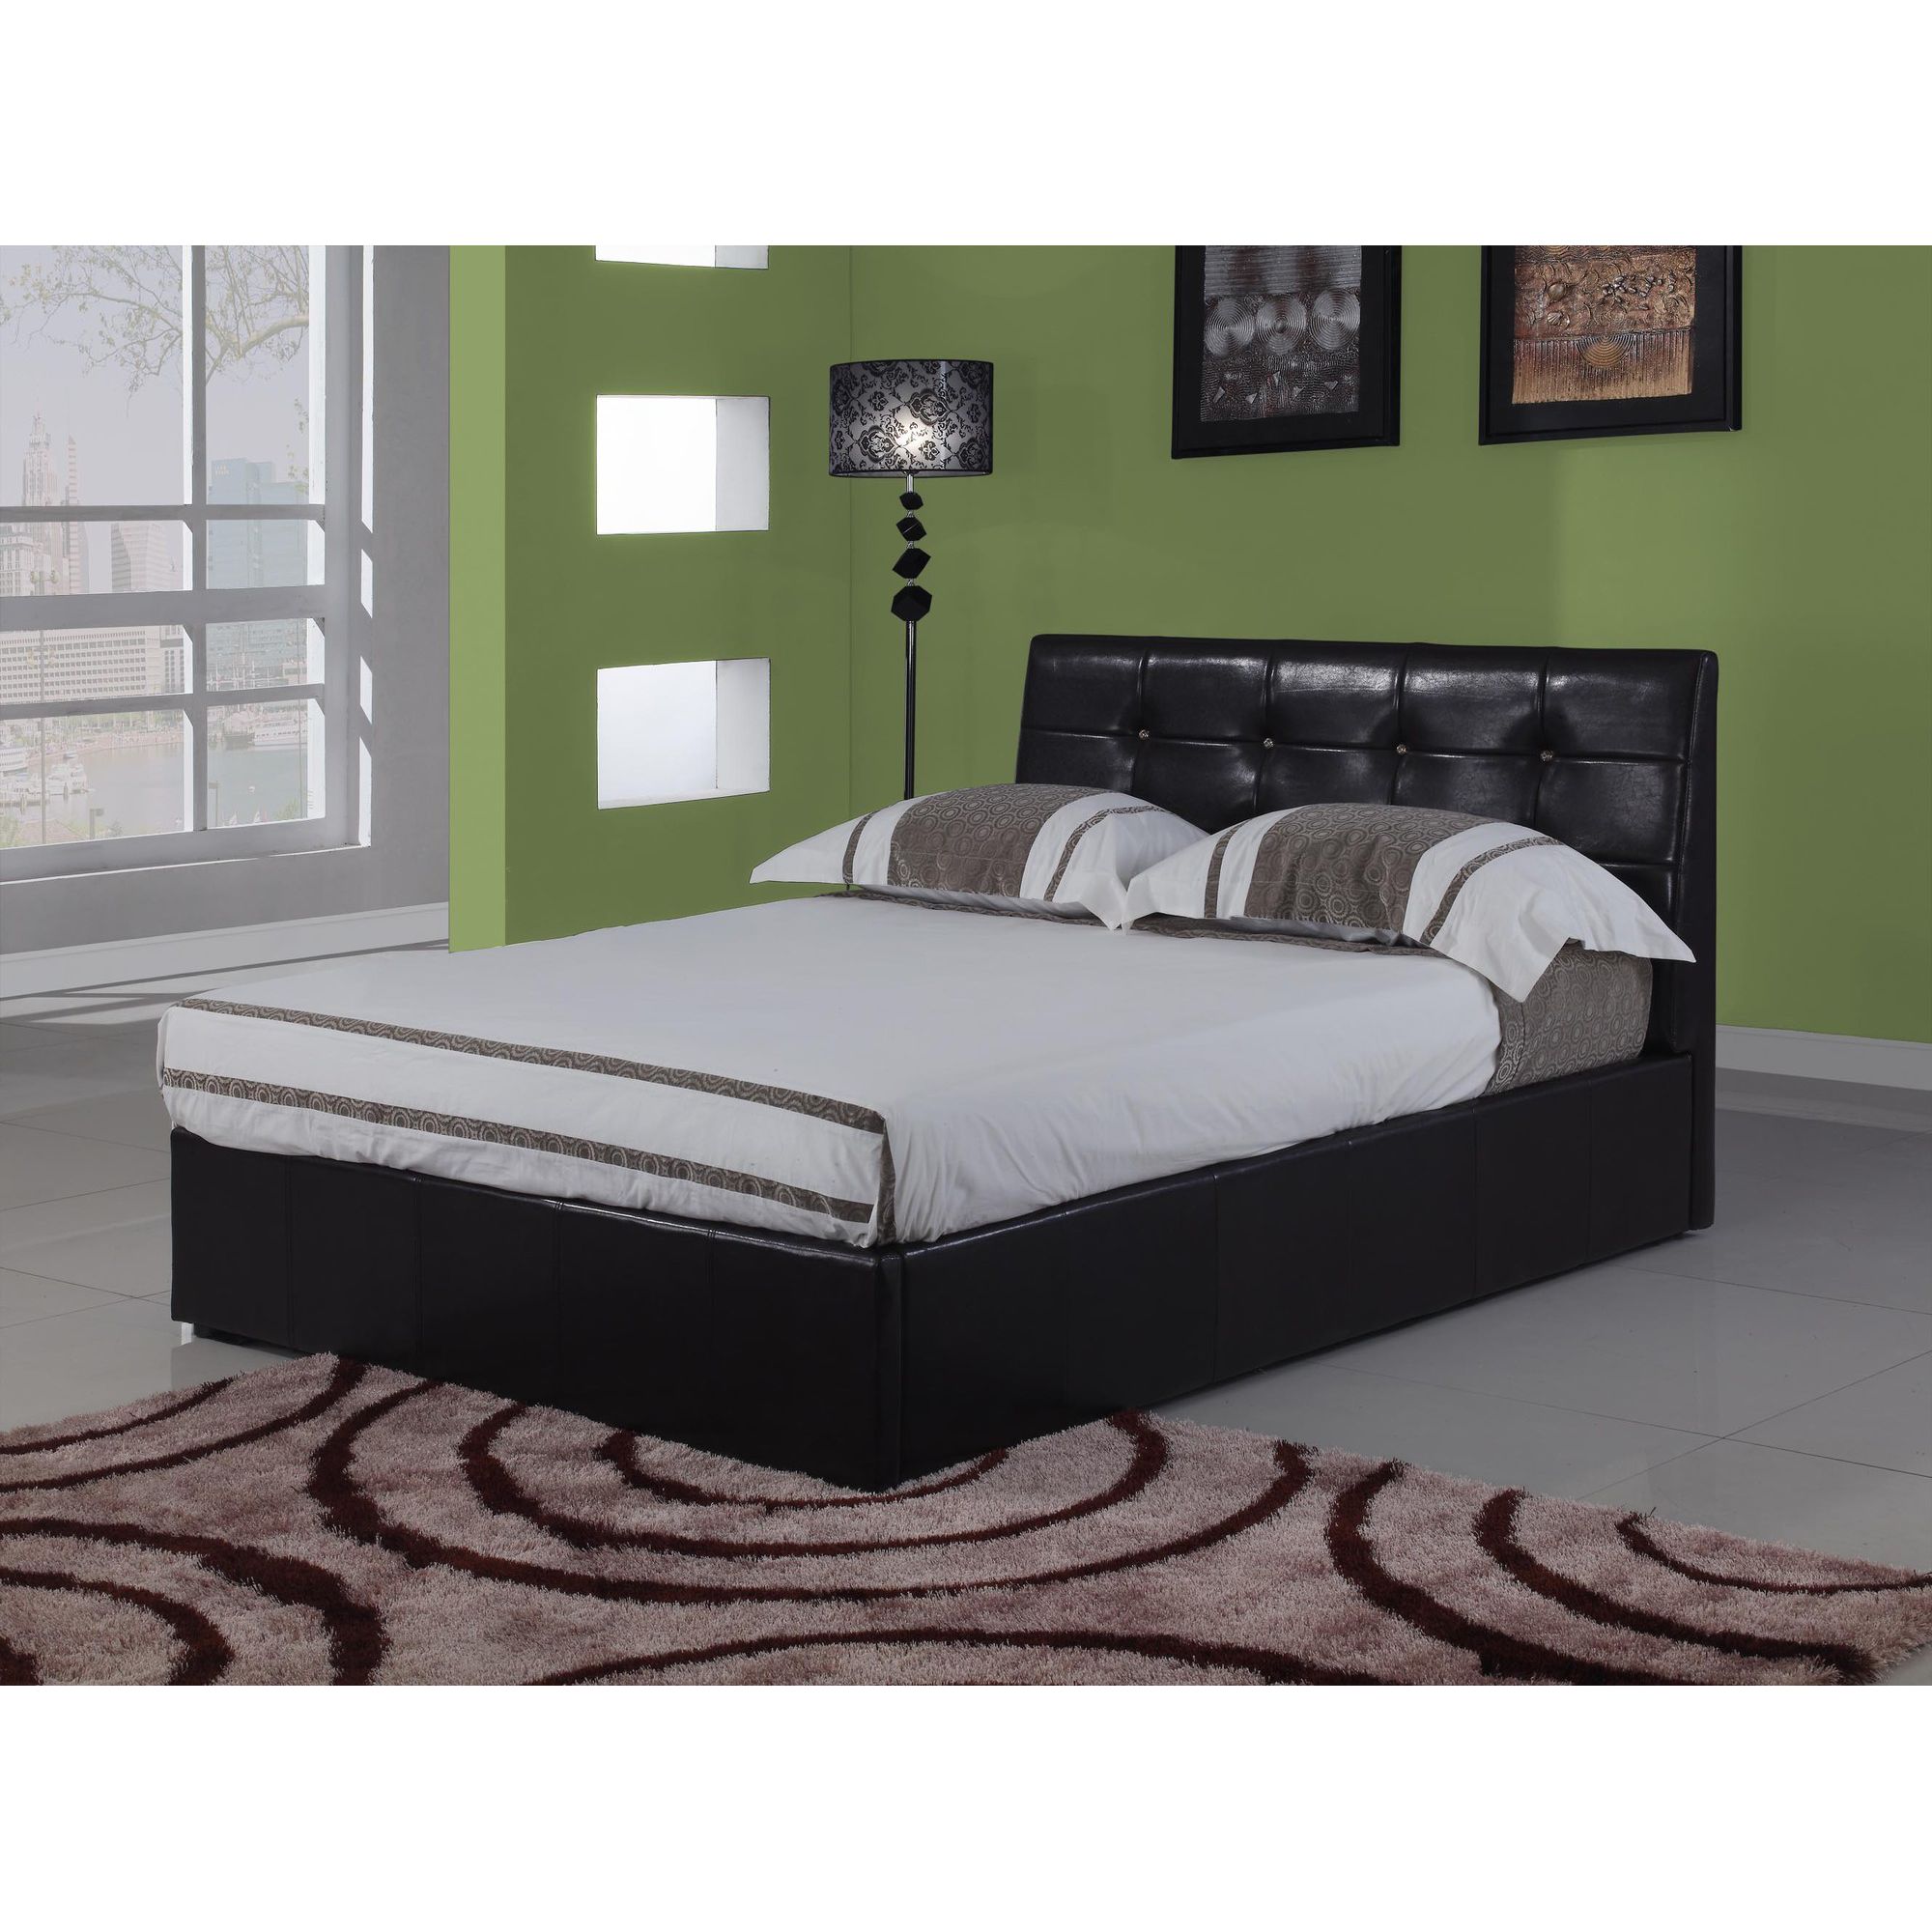 Interiors 2 suit Modena Bedframe - Small Double - Black at Tesco Direct